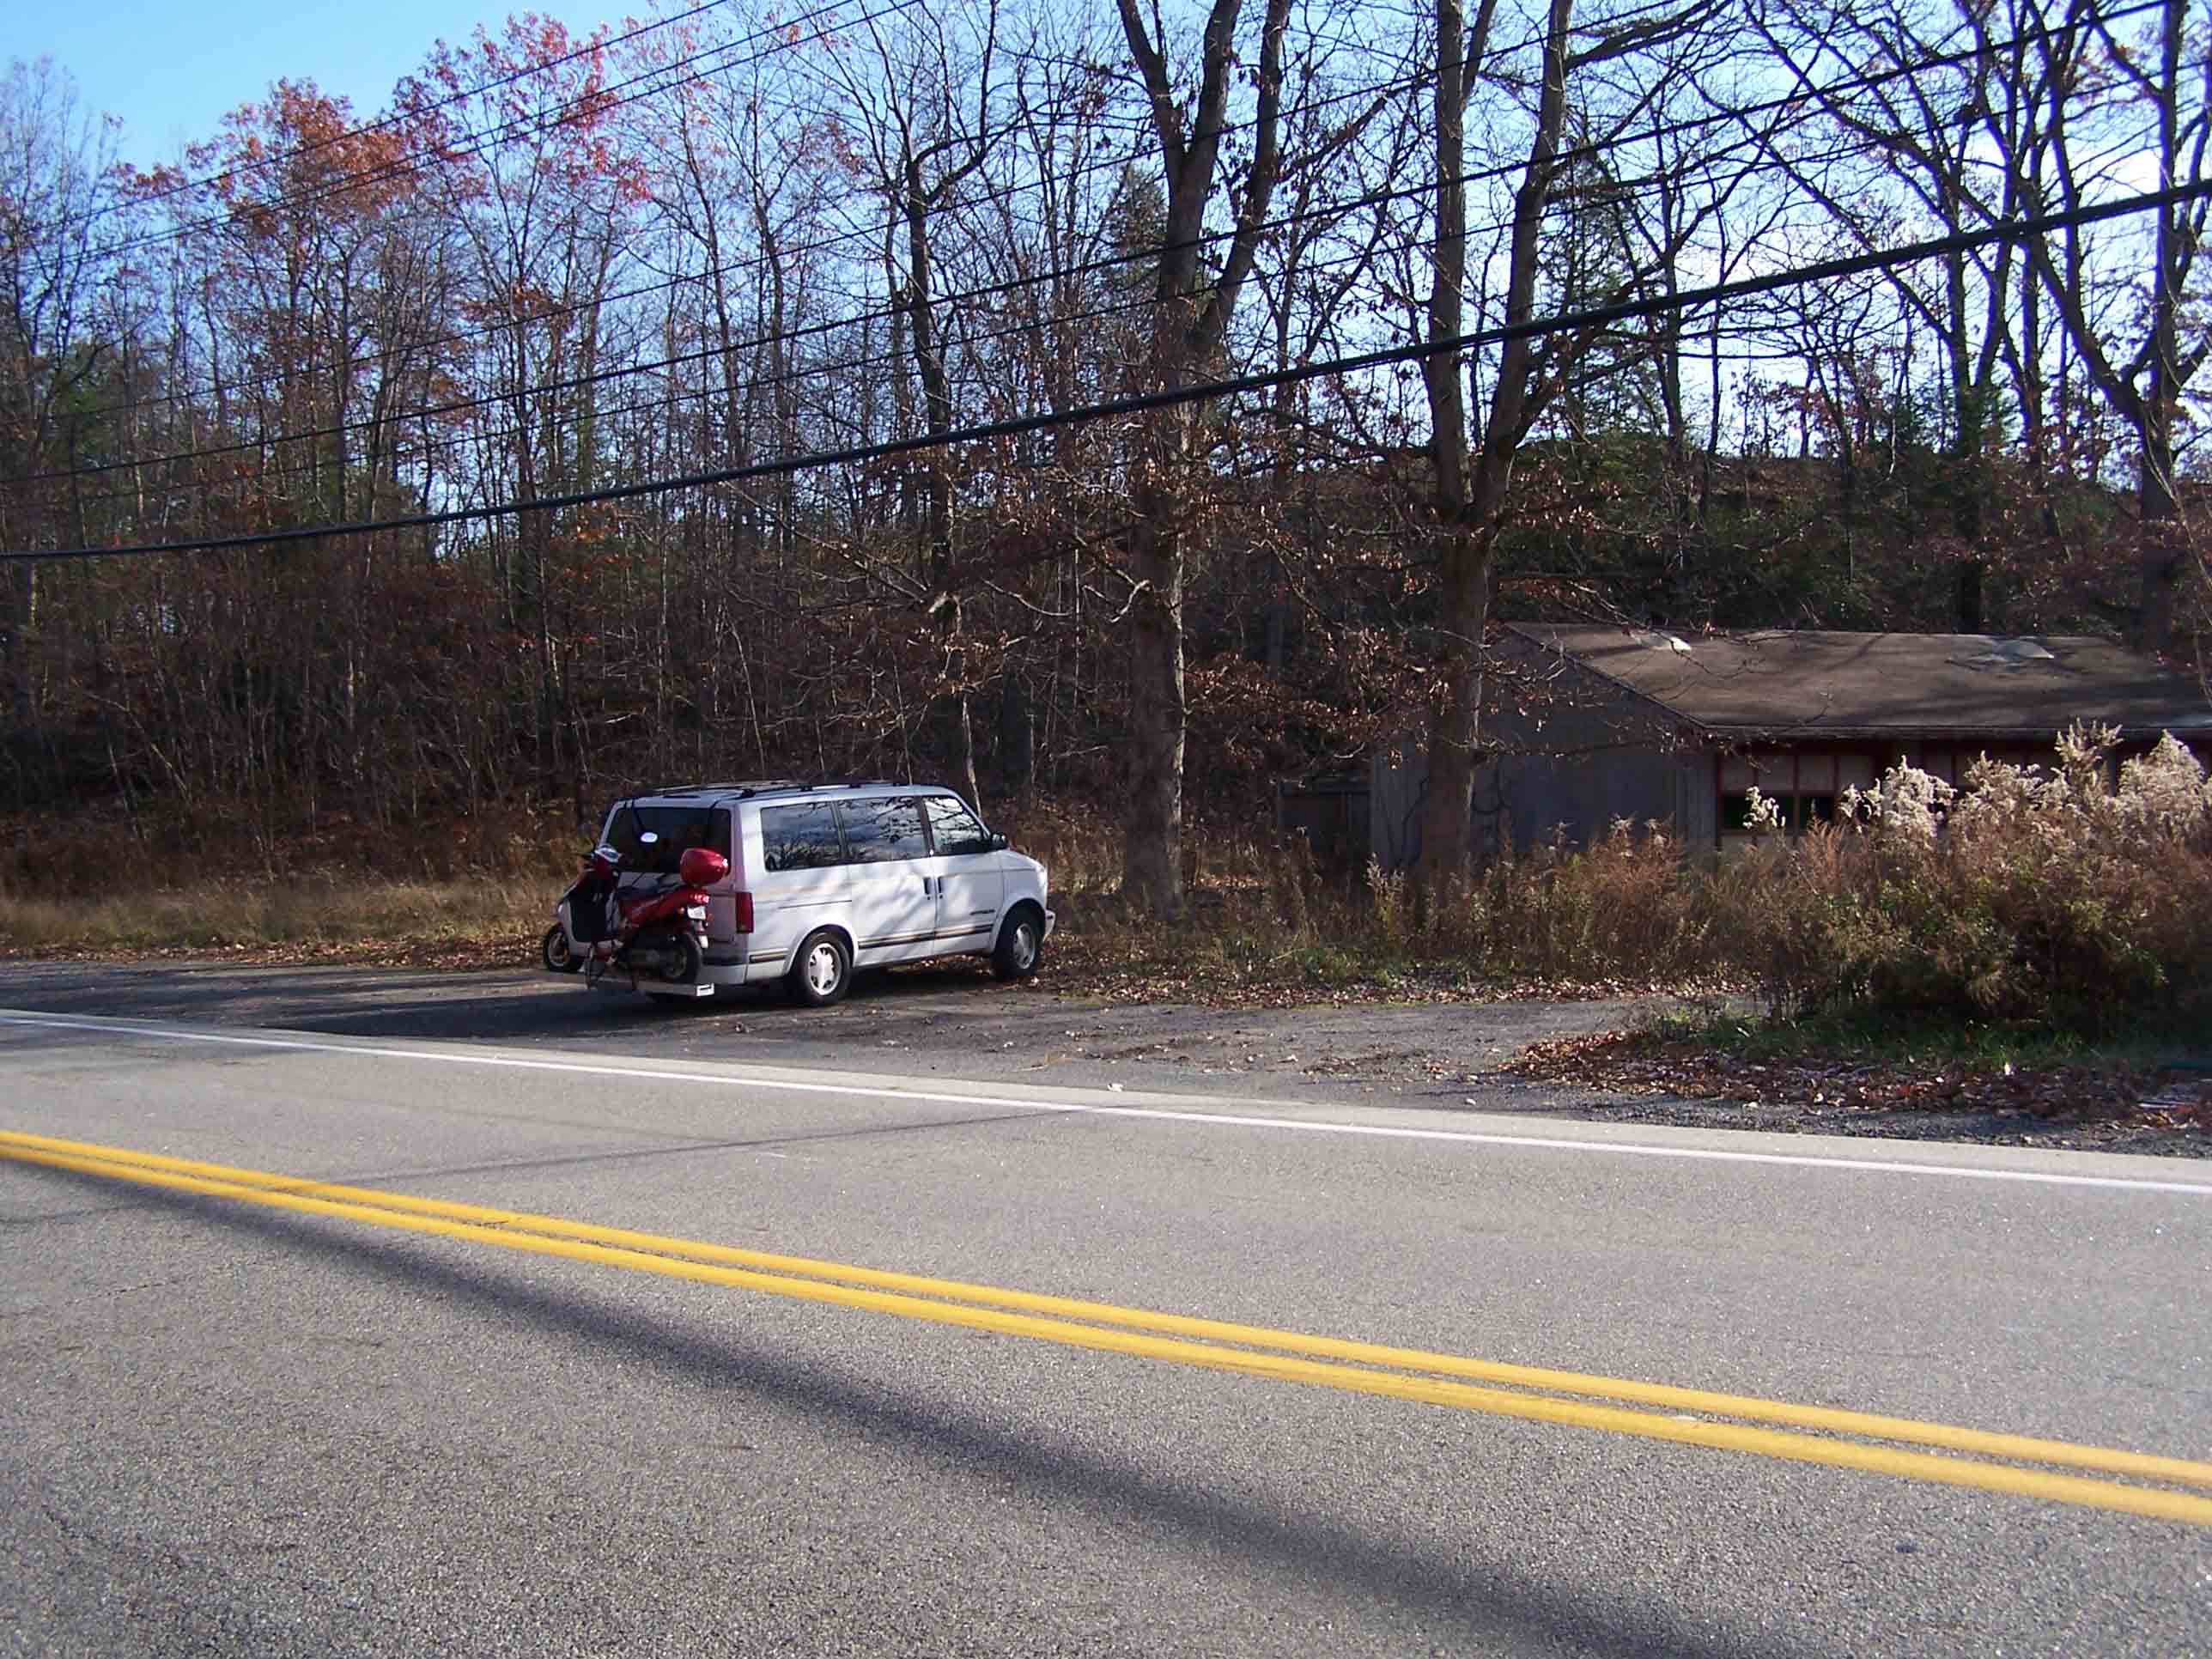 mm 0.0 - Small parking area along road next to abandoned house. AT has been relocated south of the previous parking picture 11/7/2009. Courtesy at@rohland.org